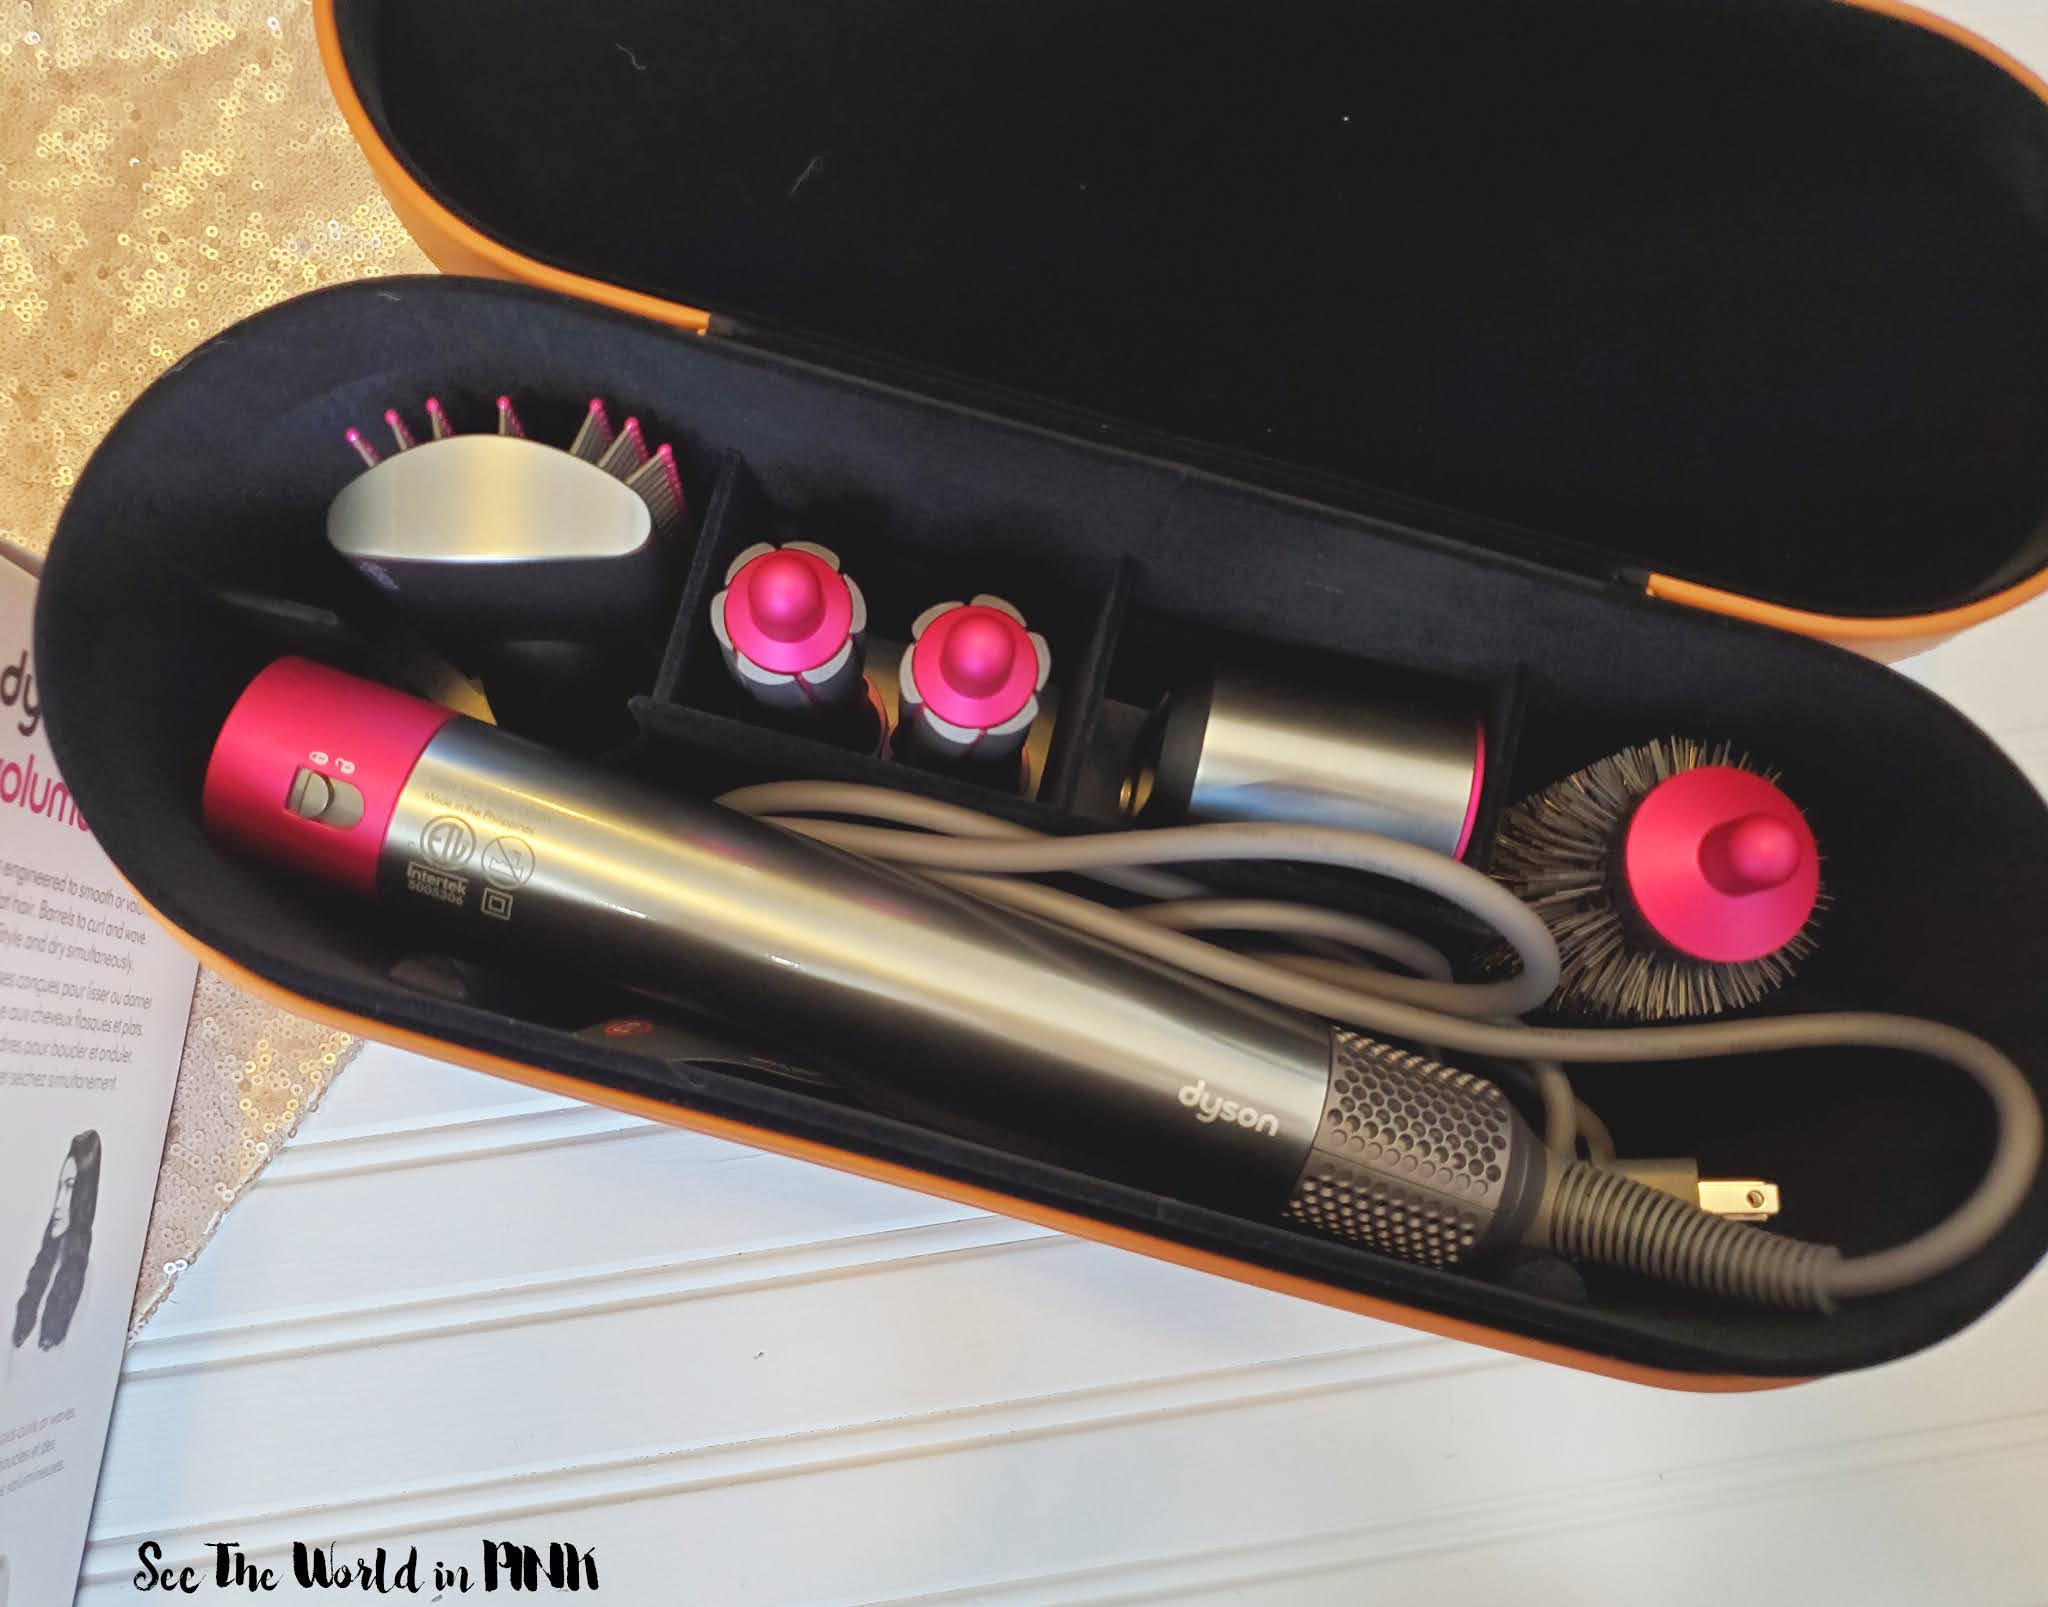 Dyson AirWrap Styler - Volume + Shape Set | See the World in PINK